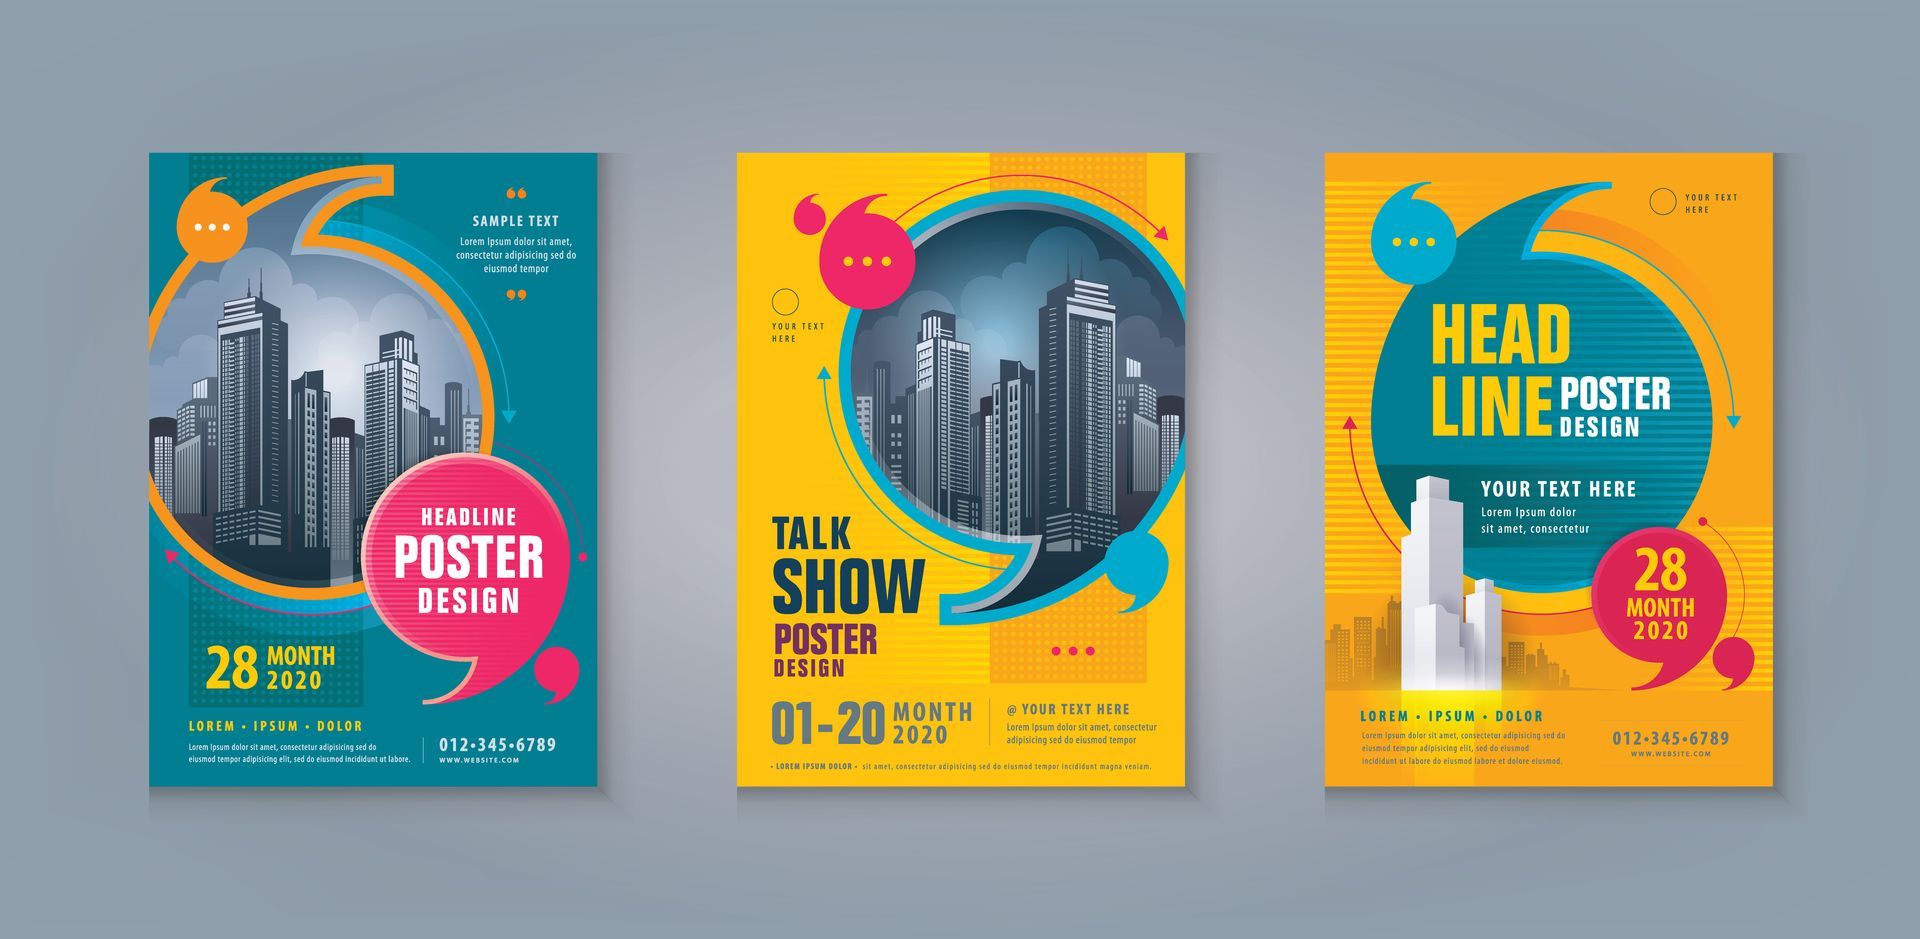 Desert Ridge Custom Posters For Conferences & Trade Shows